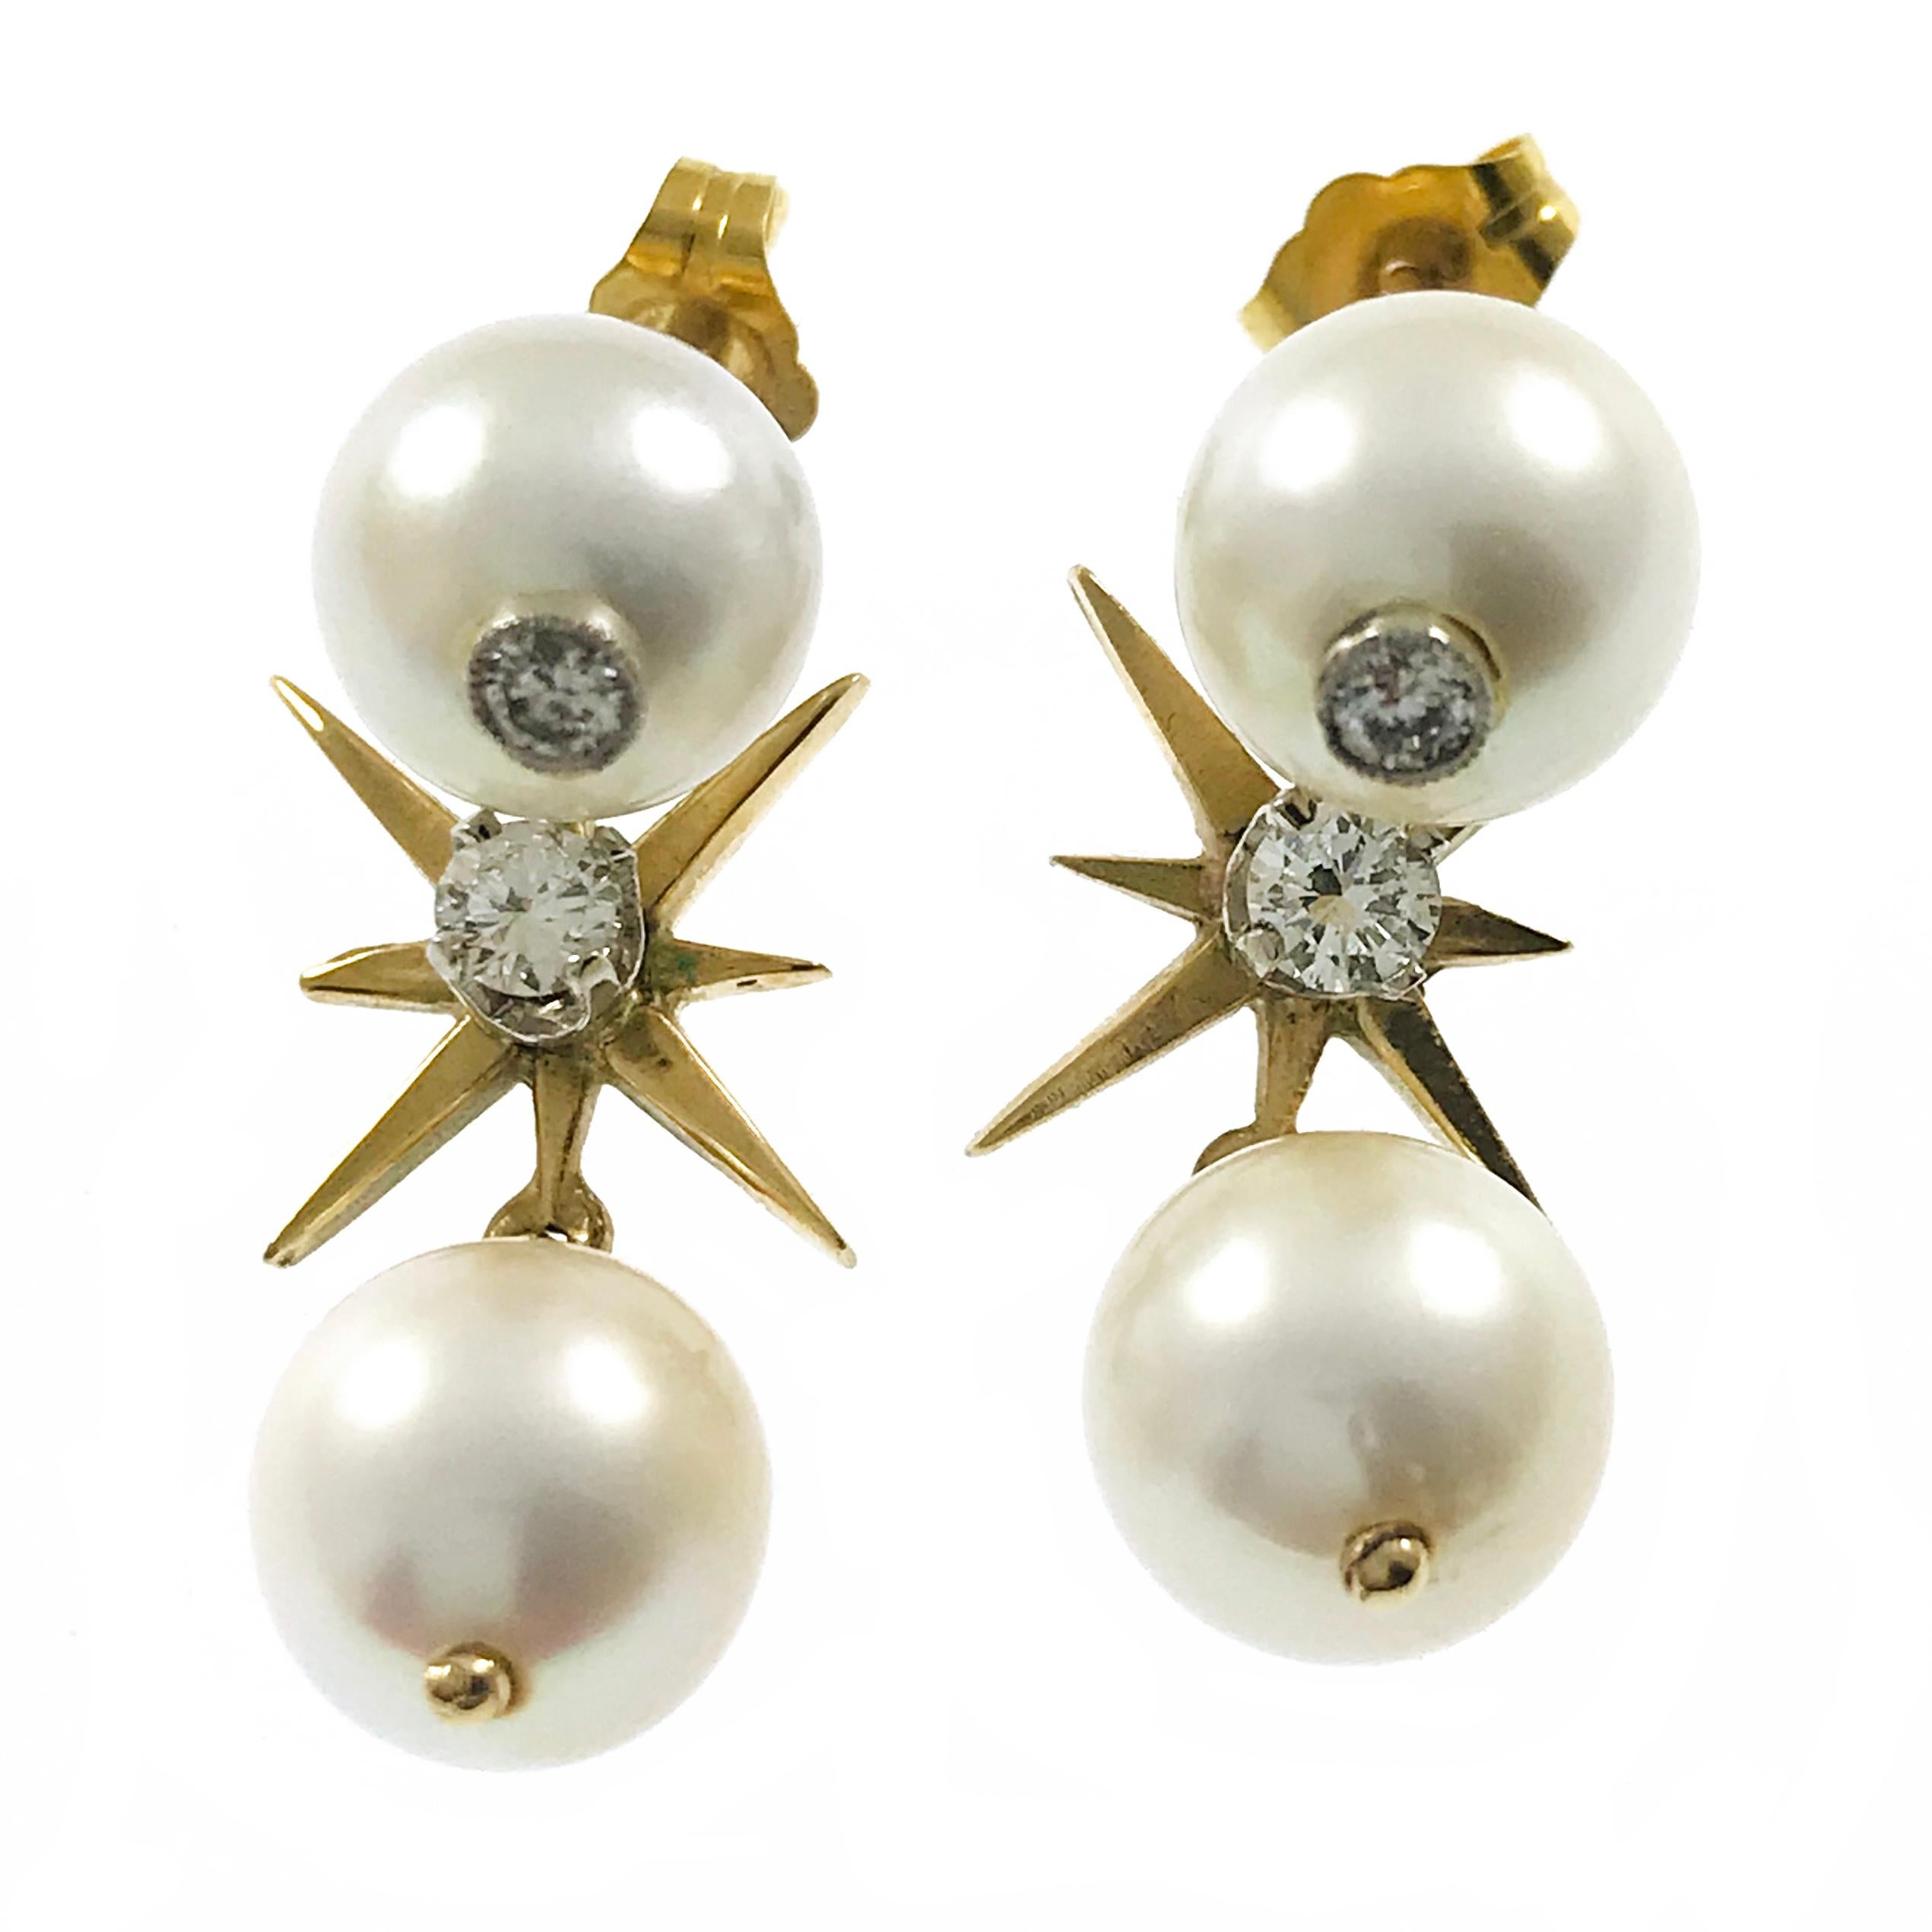 14 Karat Pearl Diamond Drop Earrings. These earrings consist of a Pearl stud with bezel-set Diamond and a gold six-point star with Diamond and Pearl. The four 8.5mm Pearls are A grade: white, pinkish; lightly blemished; good shape; good luster. The